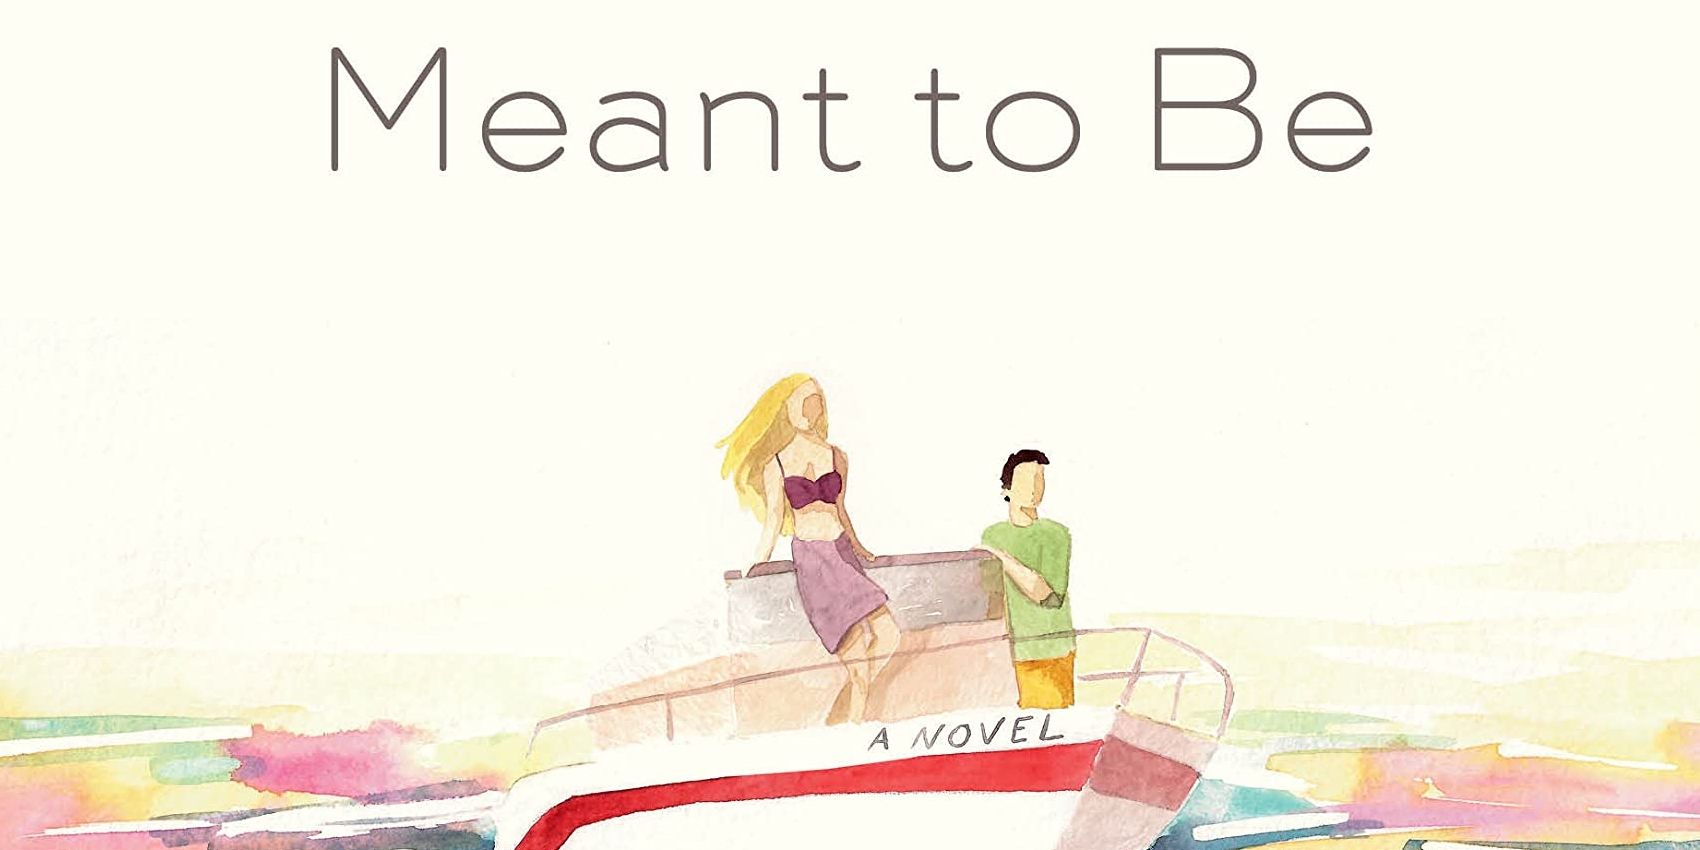 The cover of Meant To Be by Emily Giffin